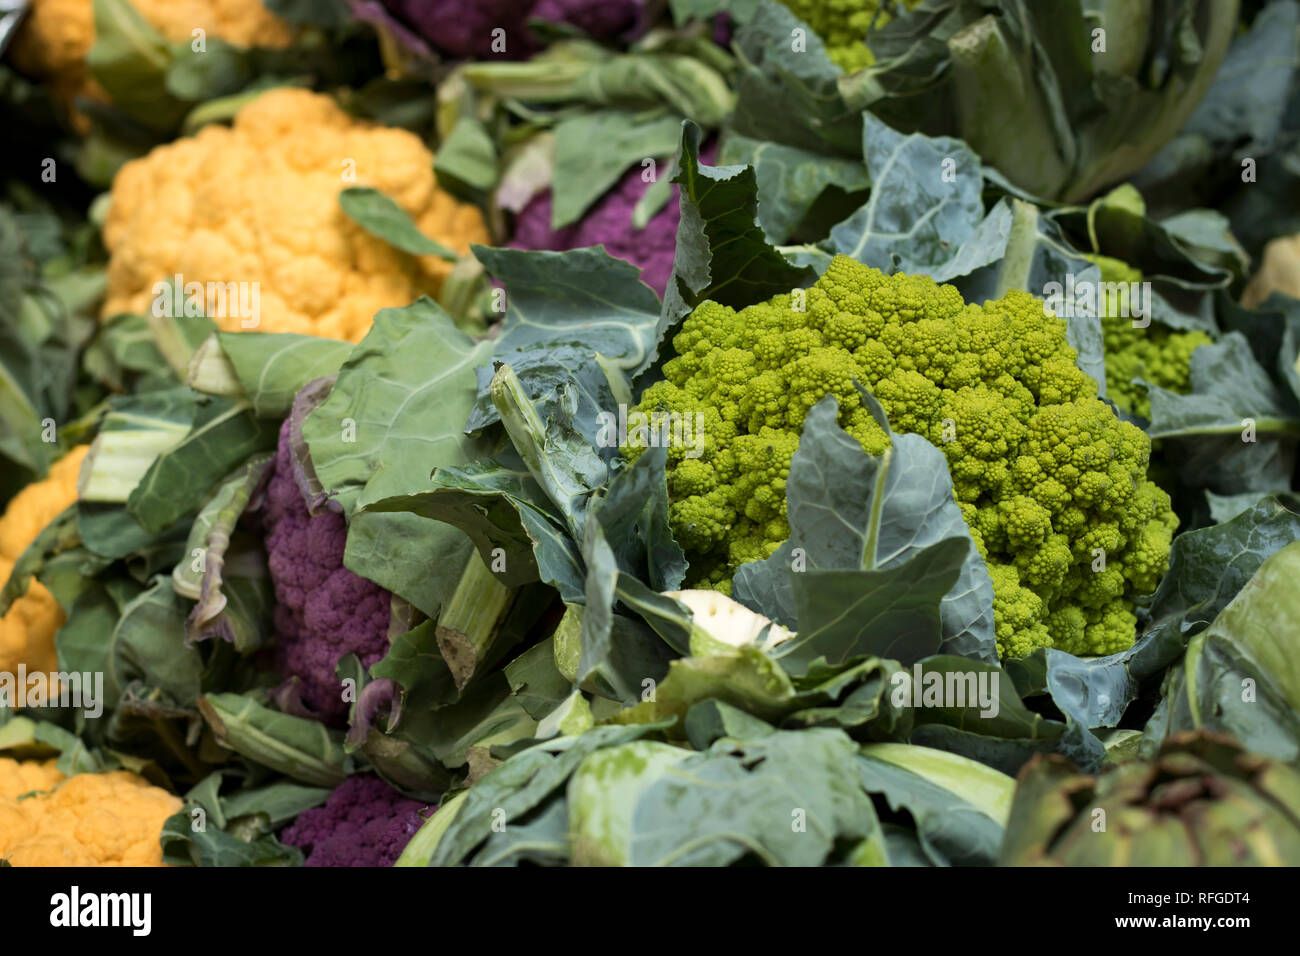 Fractal chartreuse cauliflower and a broccoli hybrid aka Romanesco at market in Pacific Northwest Stock Photo